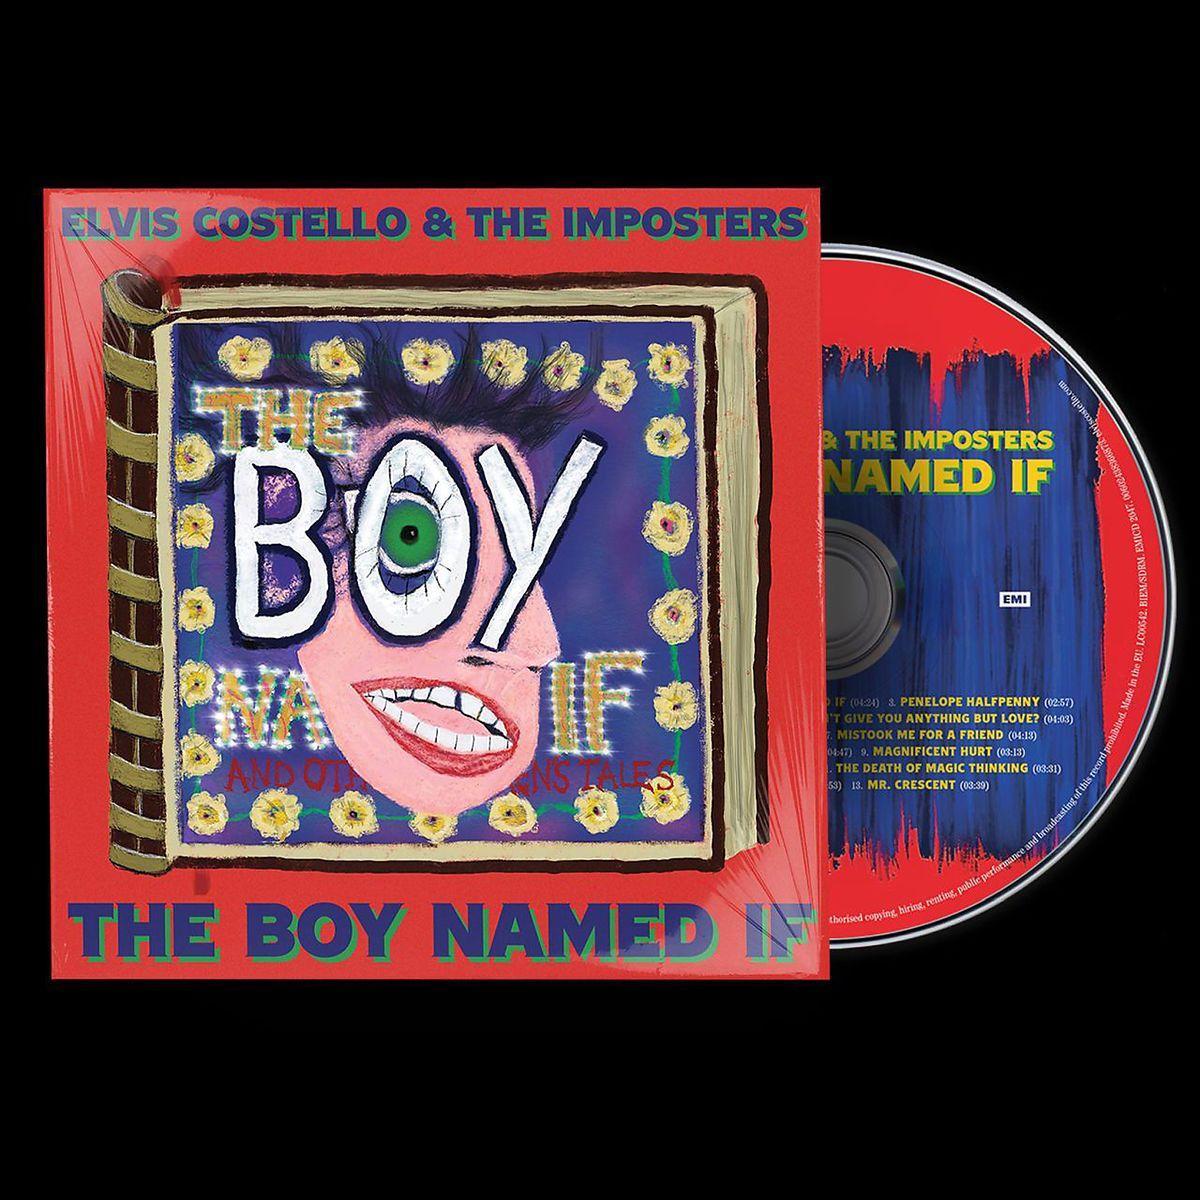 Audio Elvis Costello & The Imposters: The Boy Named If 